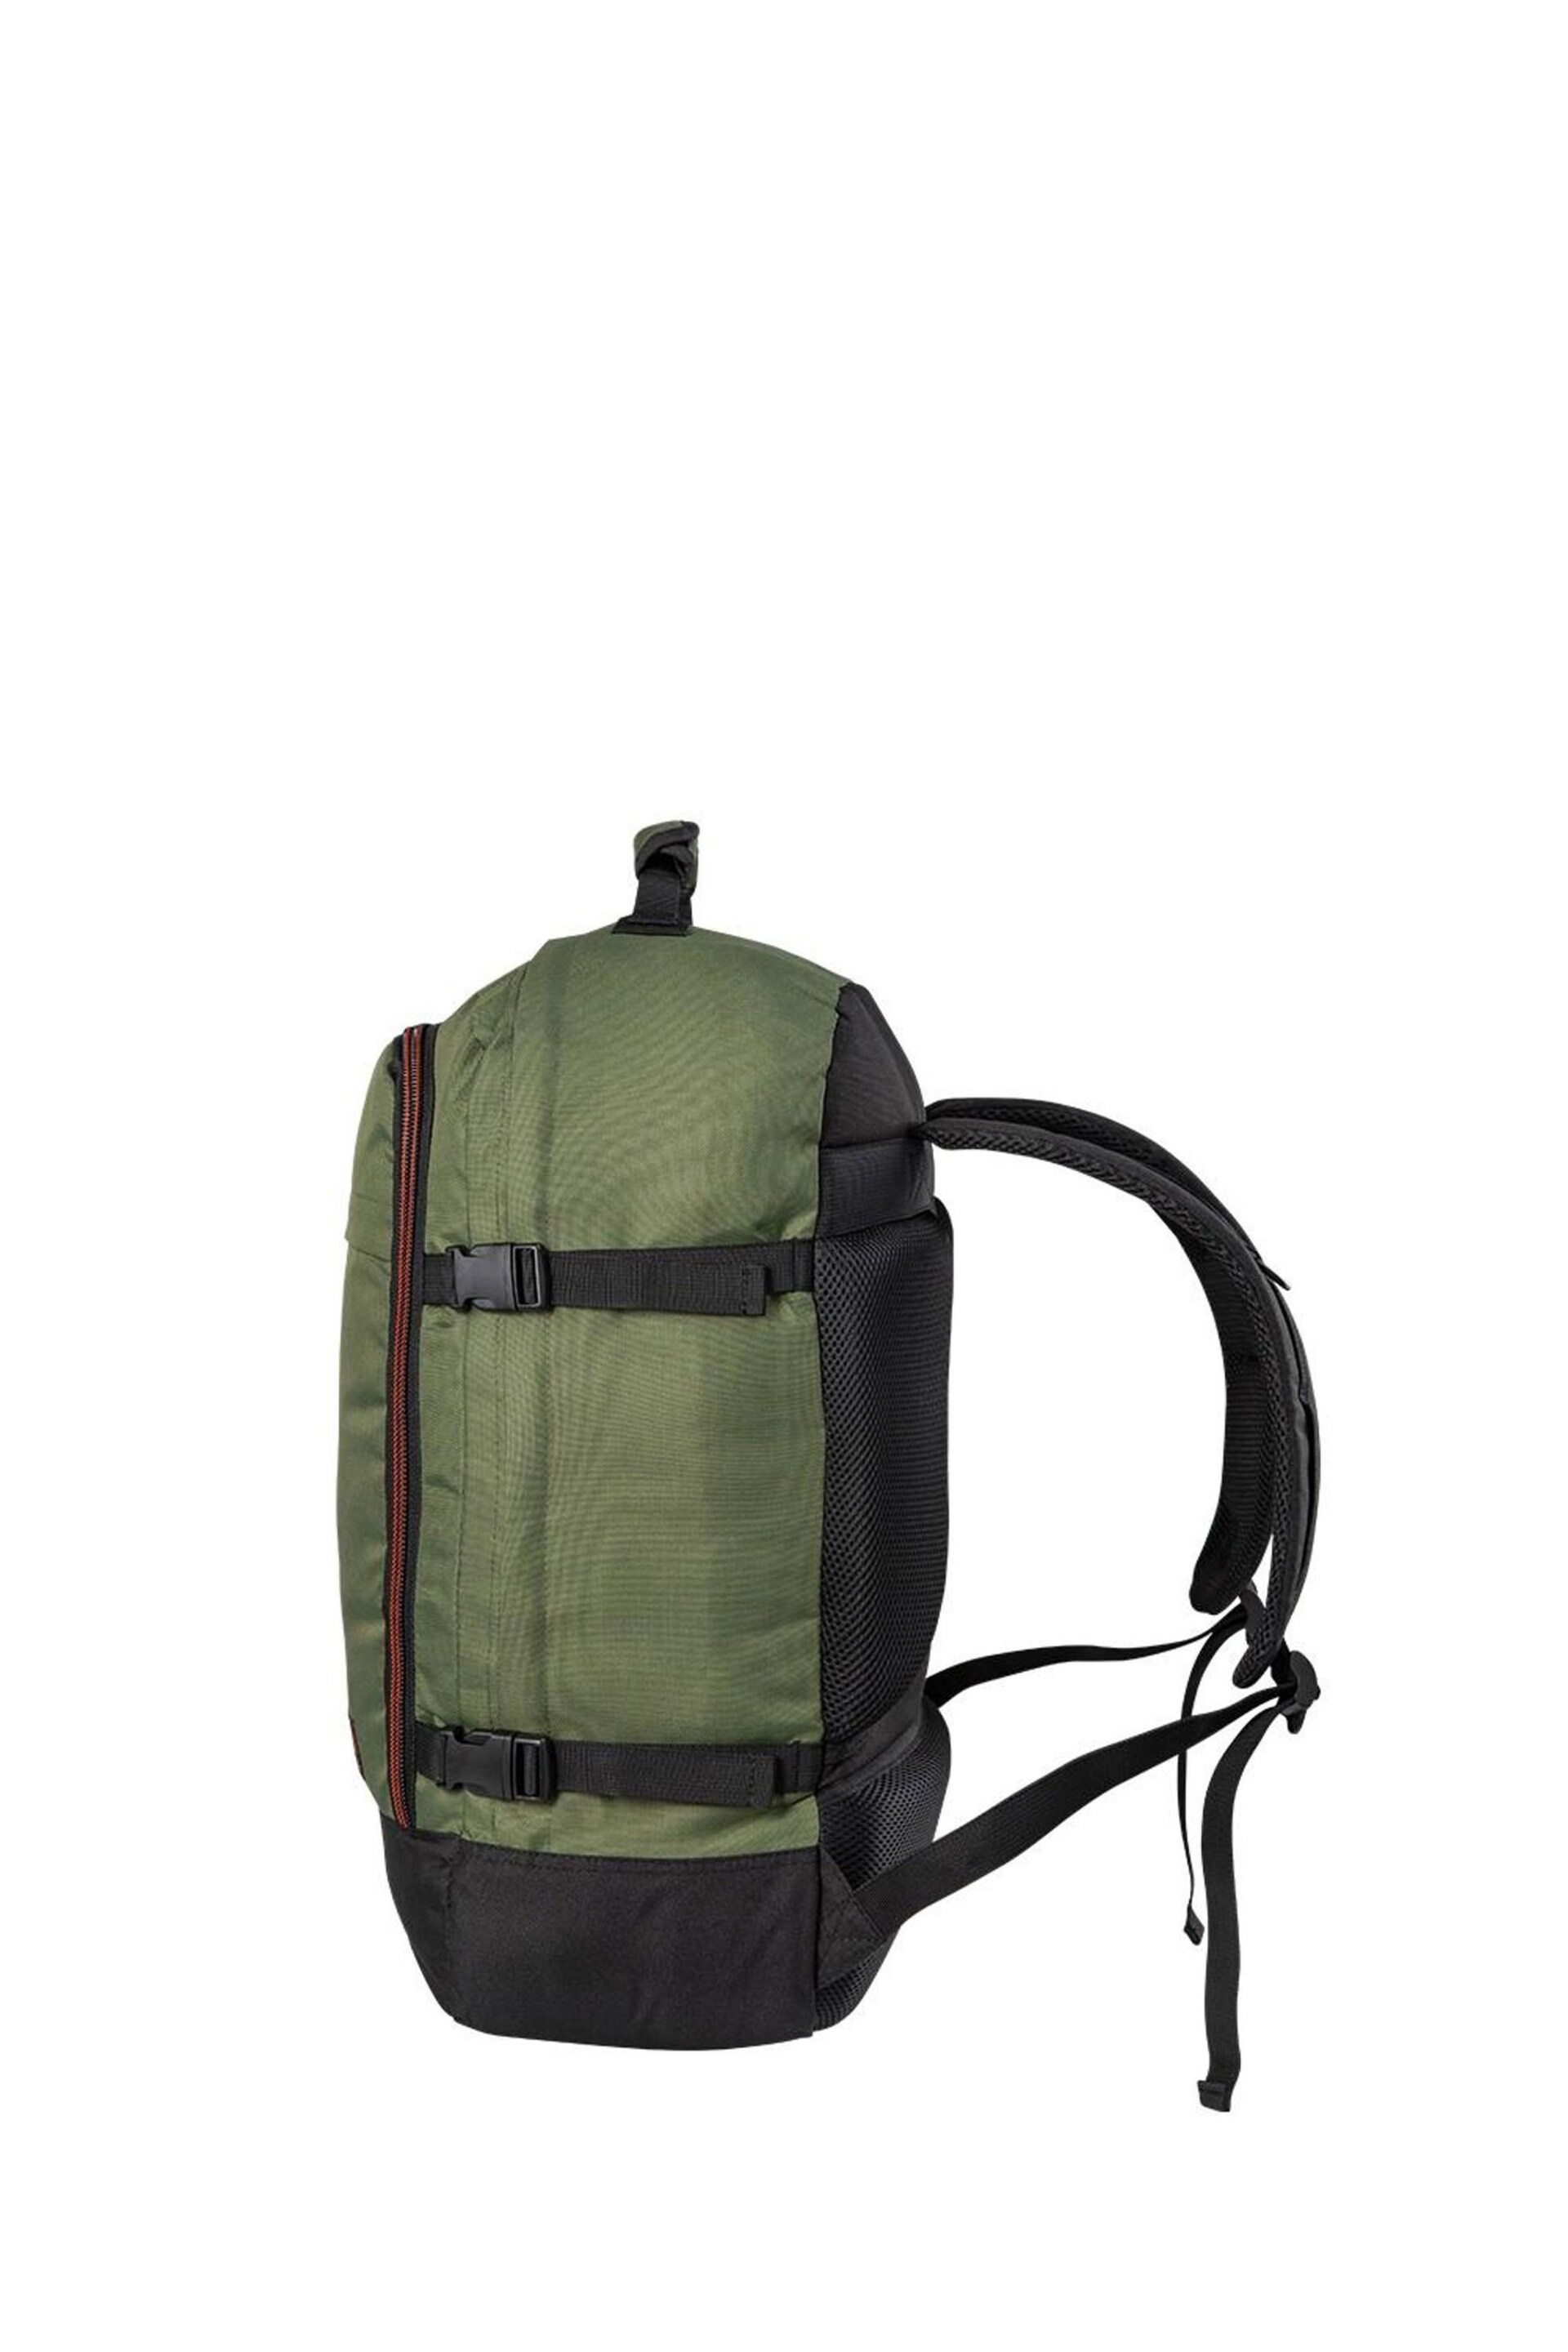 Cabin Max Metz 44L Carry On 55cm Backpack - Image 2 of 5